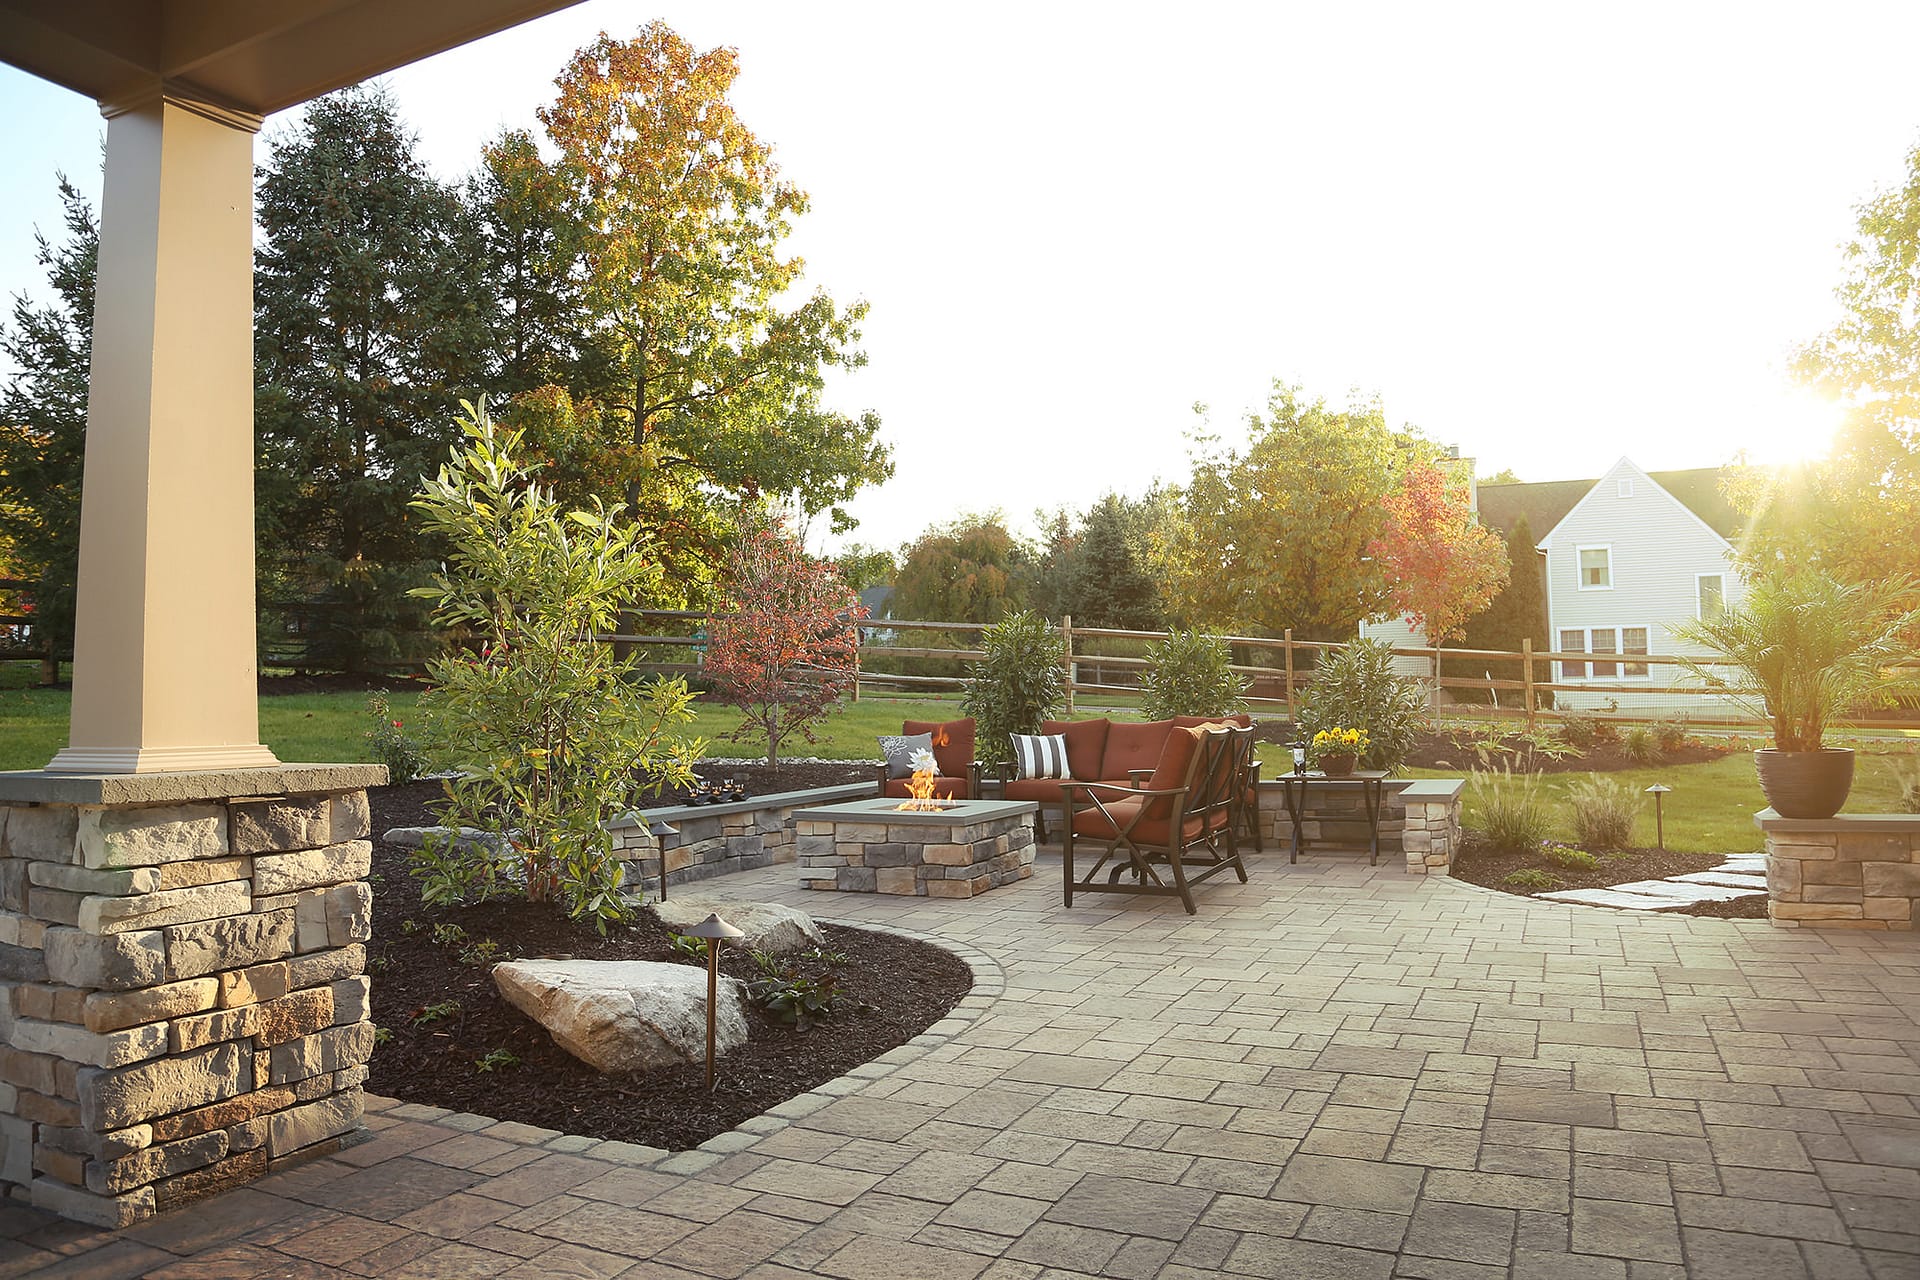 Including a natural gas fire pit into the patio provides a warm destination for the whole family to gather around and make memories.